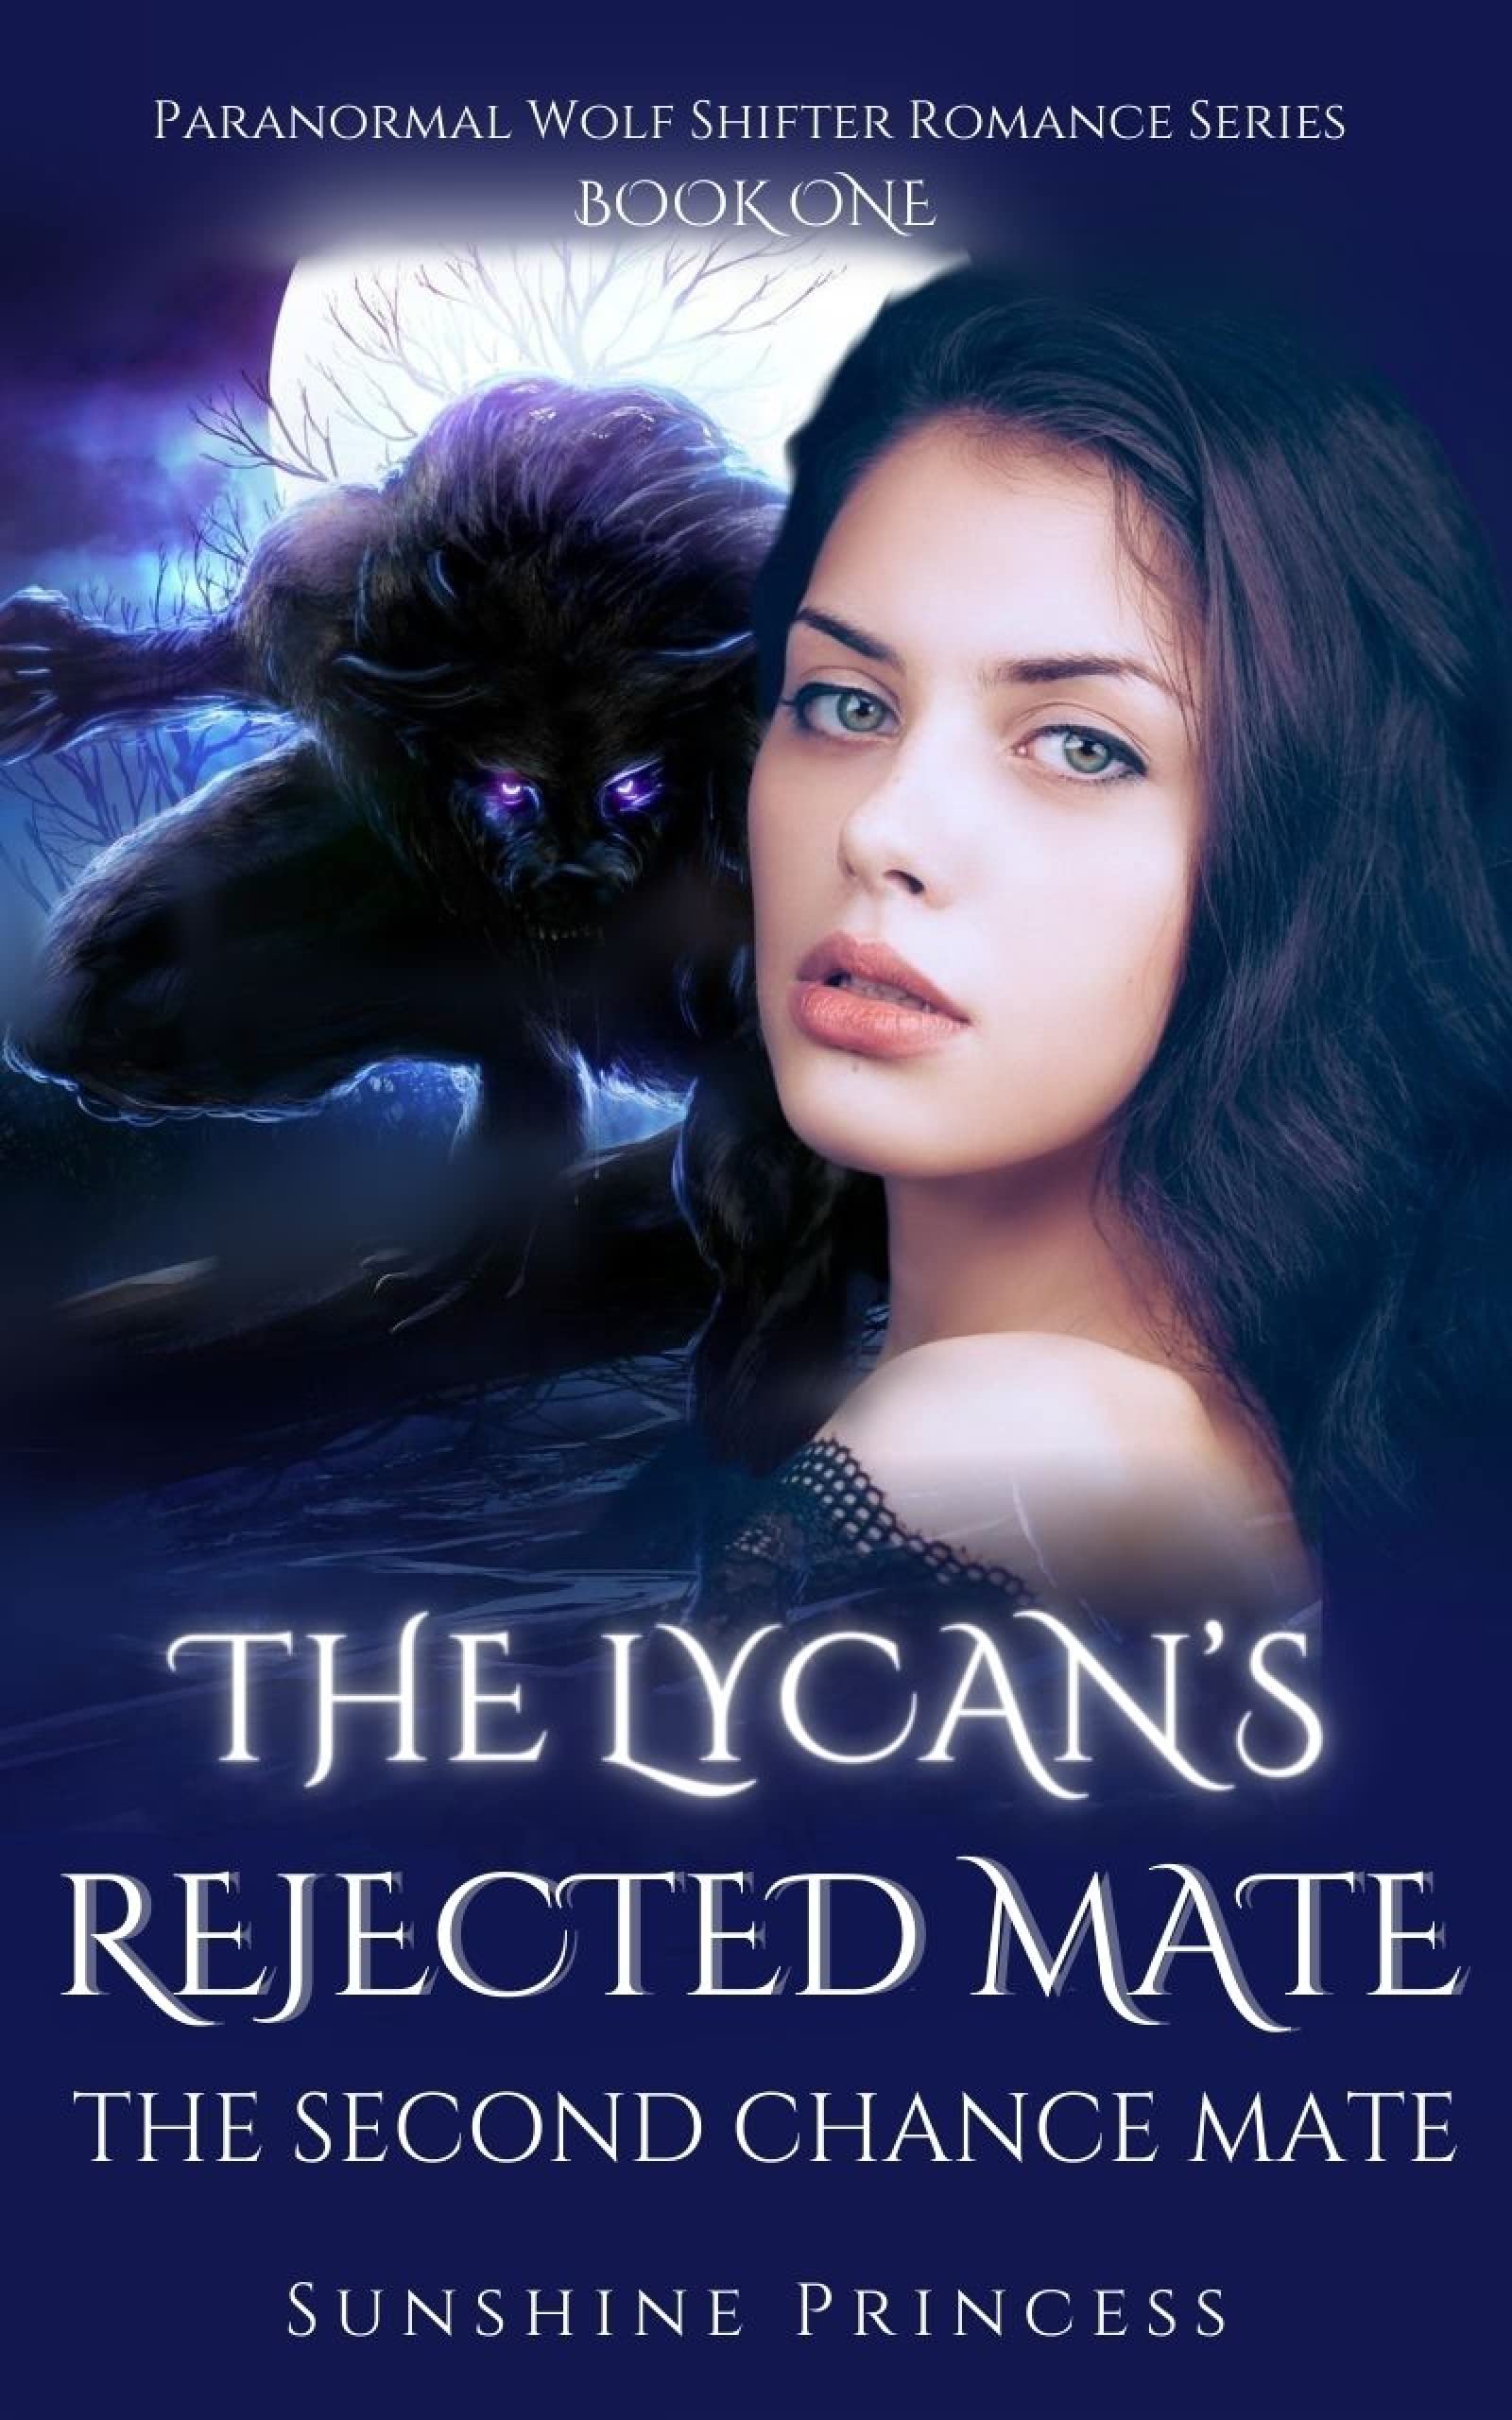 the lycan kings second chance mate